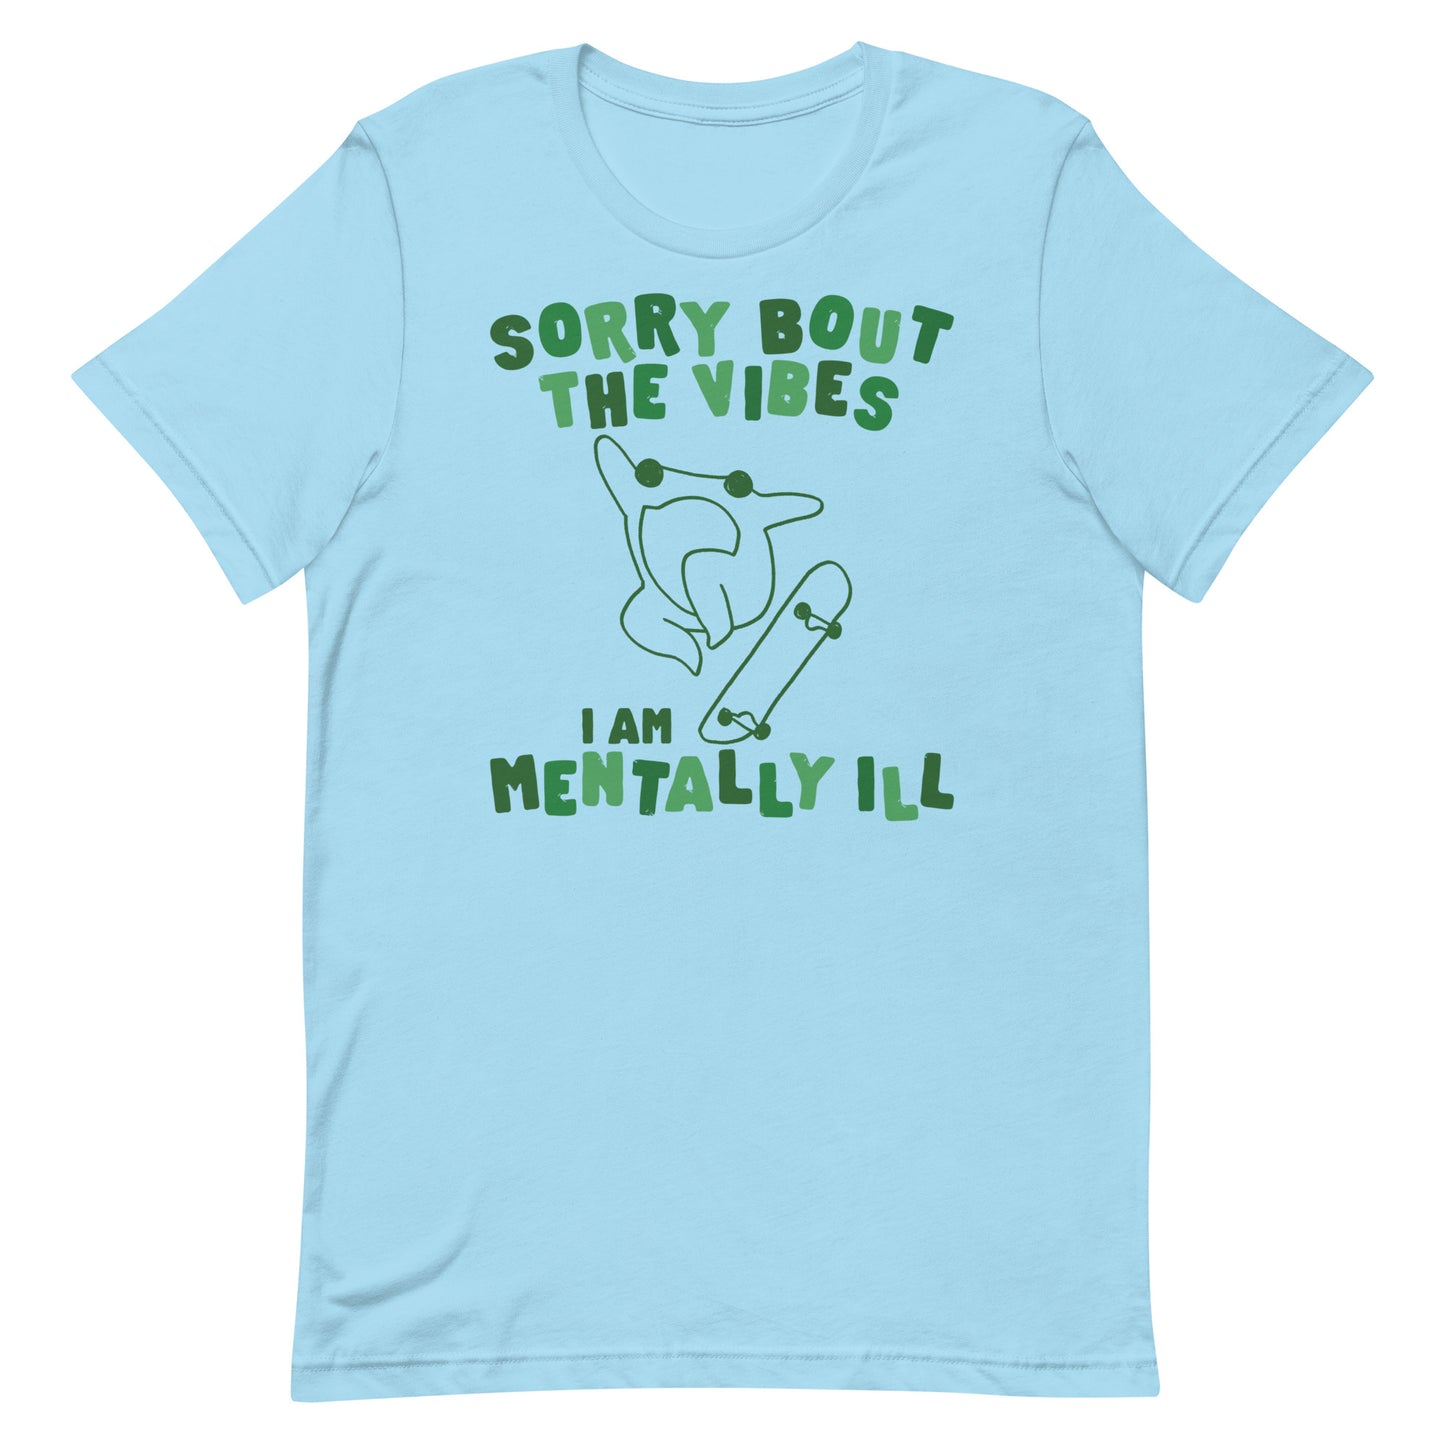 Sorry About The Vibes I'm Mentally Ill Unisex t-shirt